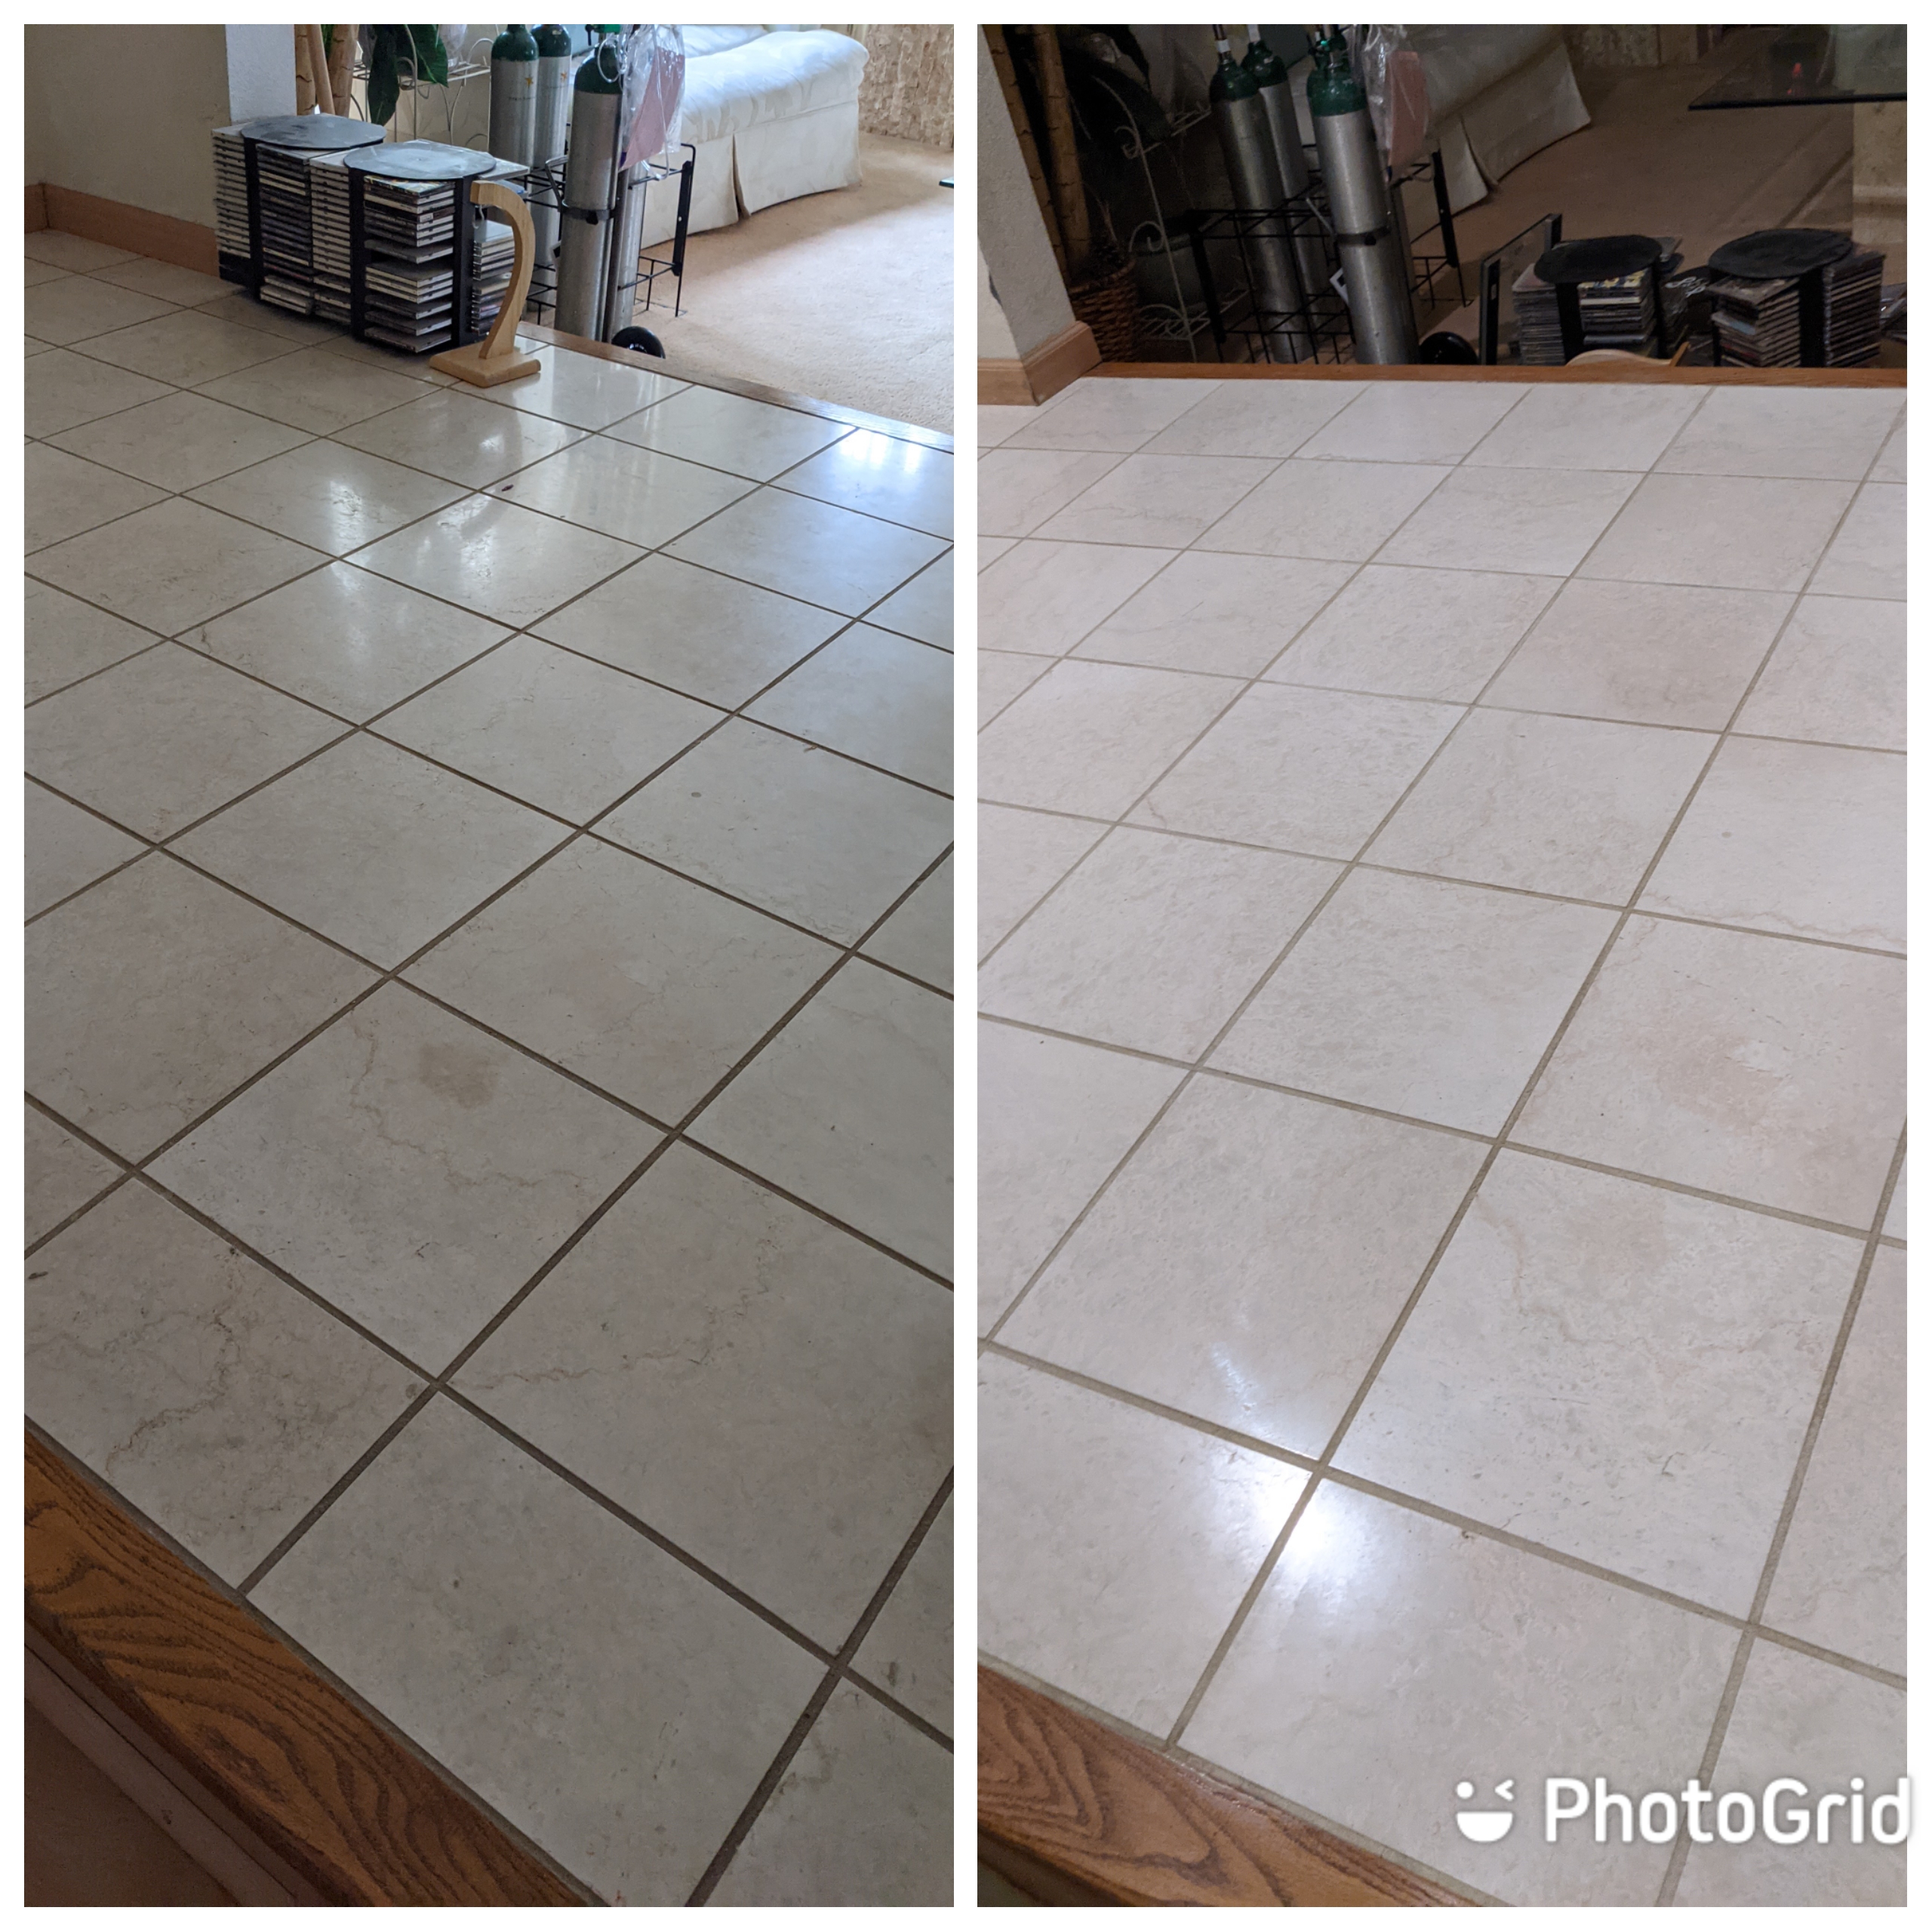 Natural stone polishing service nearby concord ca cleaned specialty - Restoration Cleaning: Your Carpet Restored Or Cleaned Right